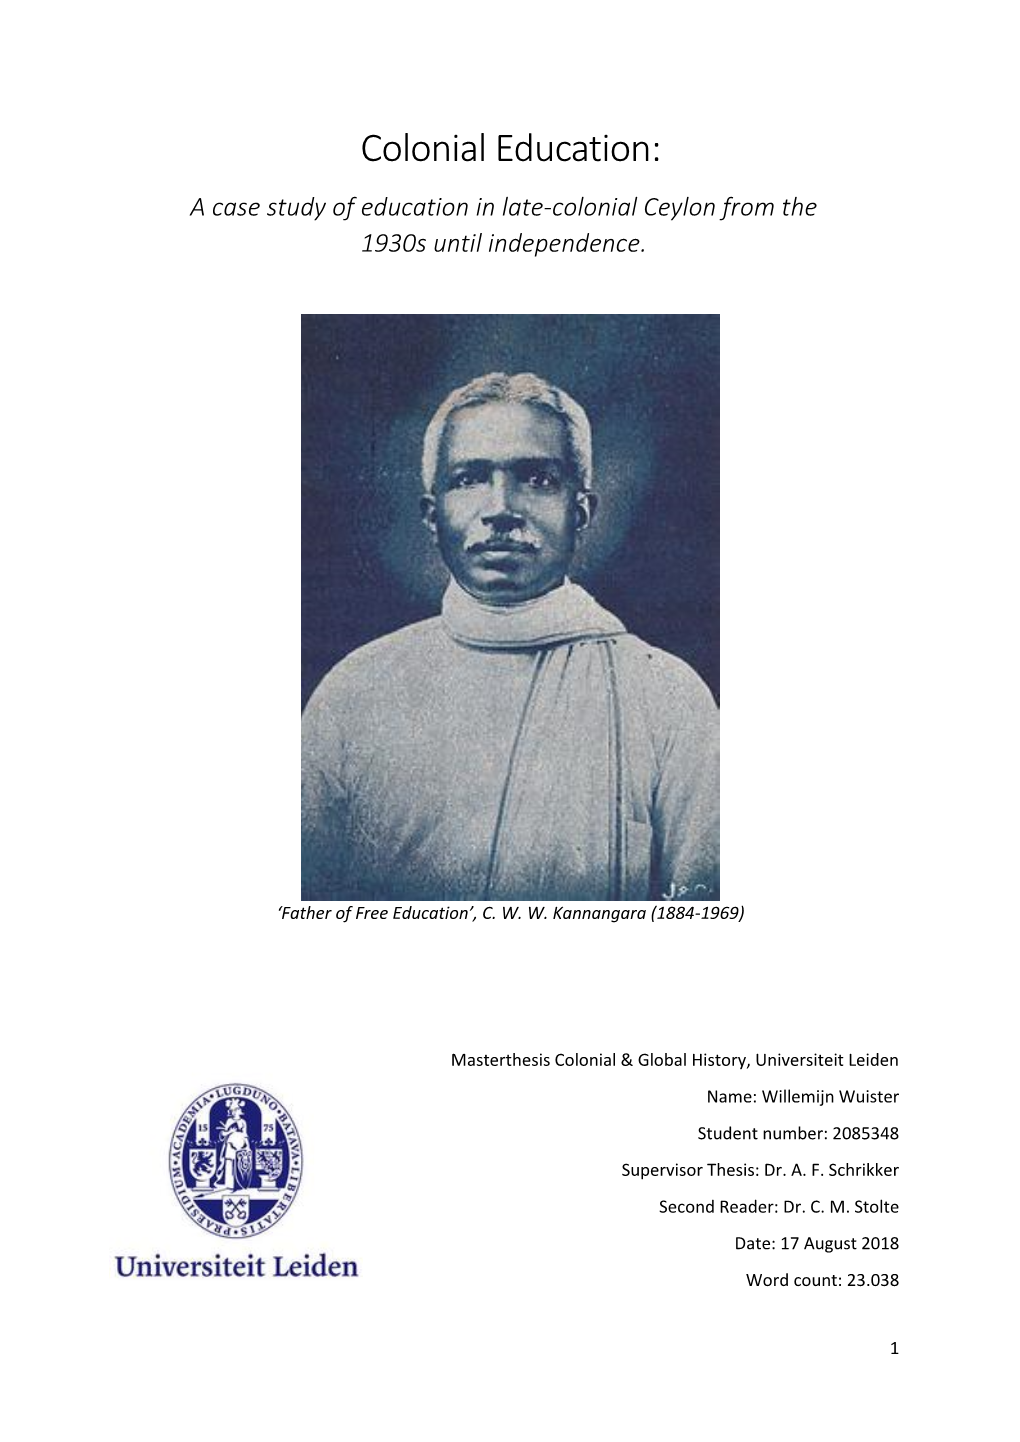 Colonial Education: a Case Study of Education in Late-Colonial Ceylon from the 1930S Until Independence